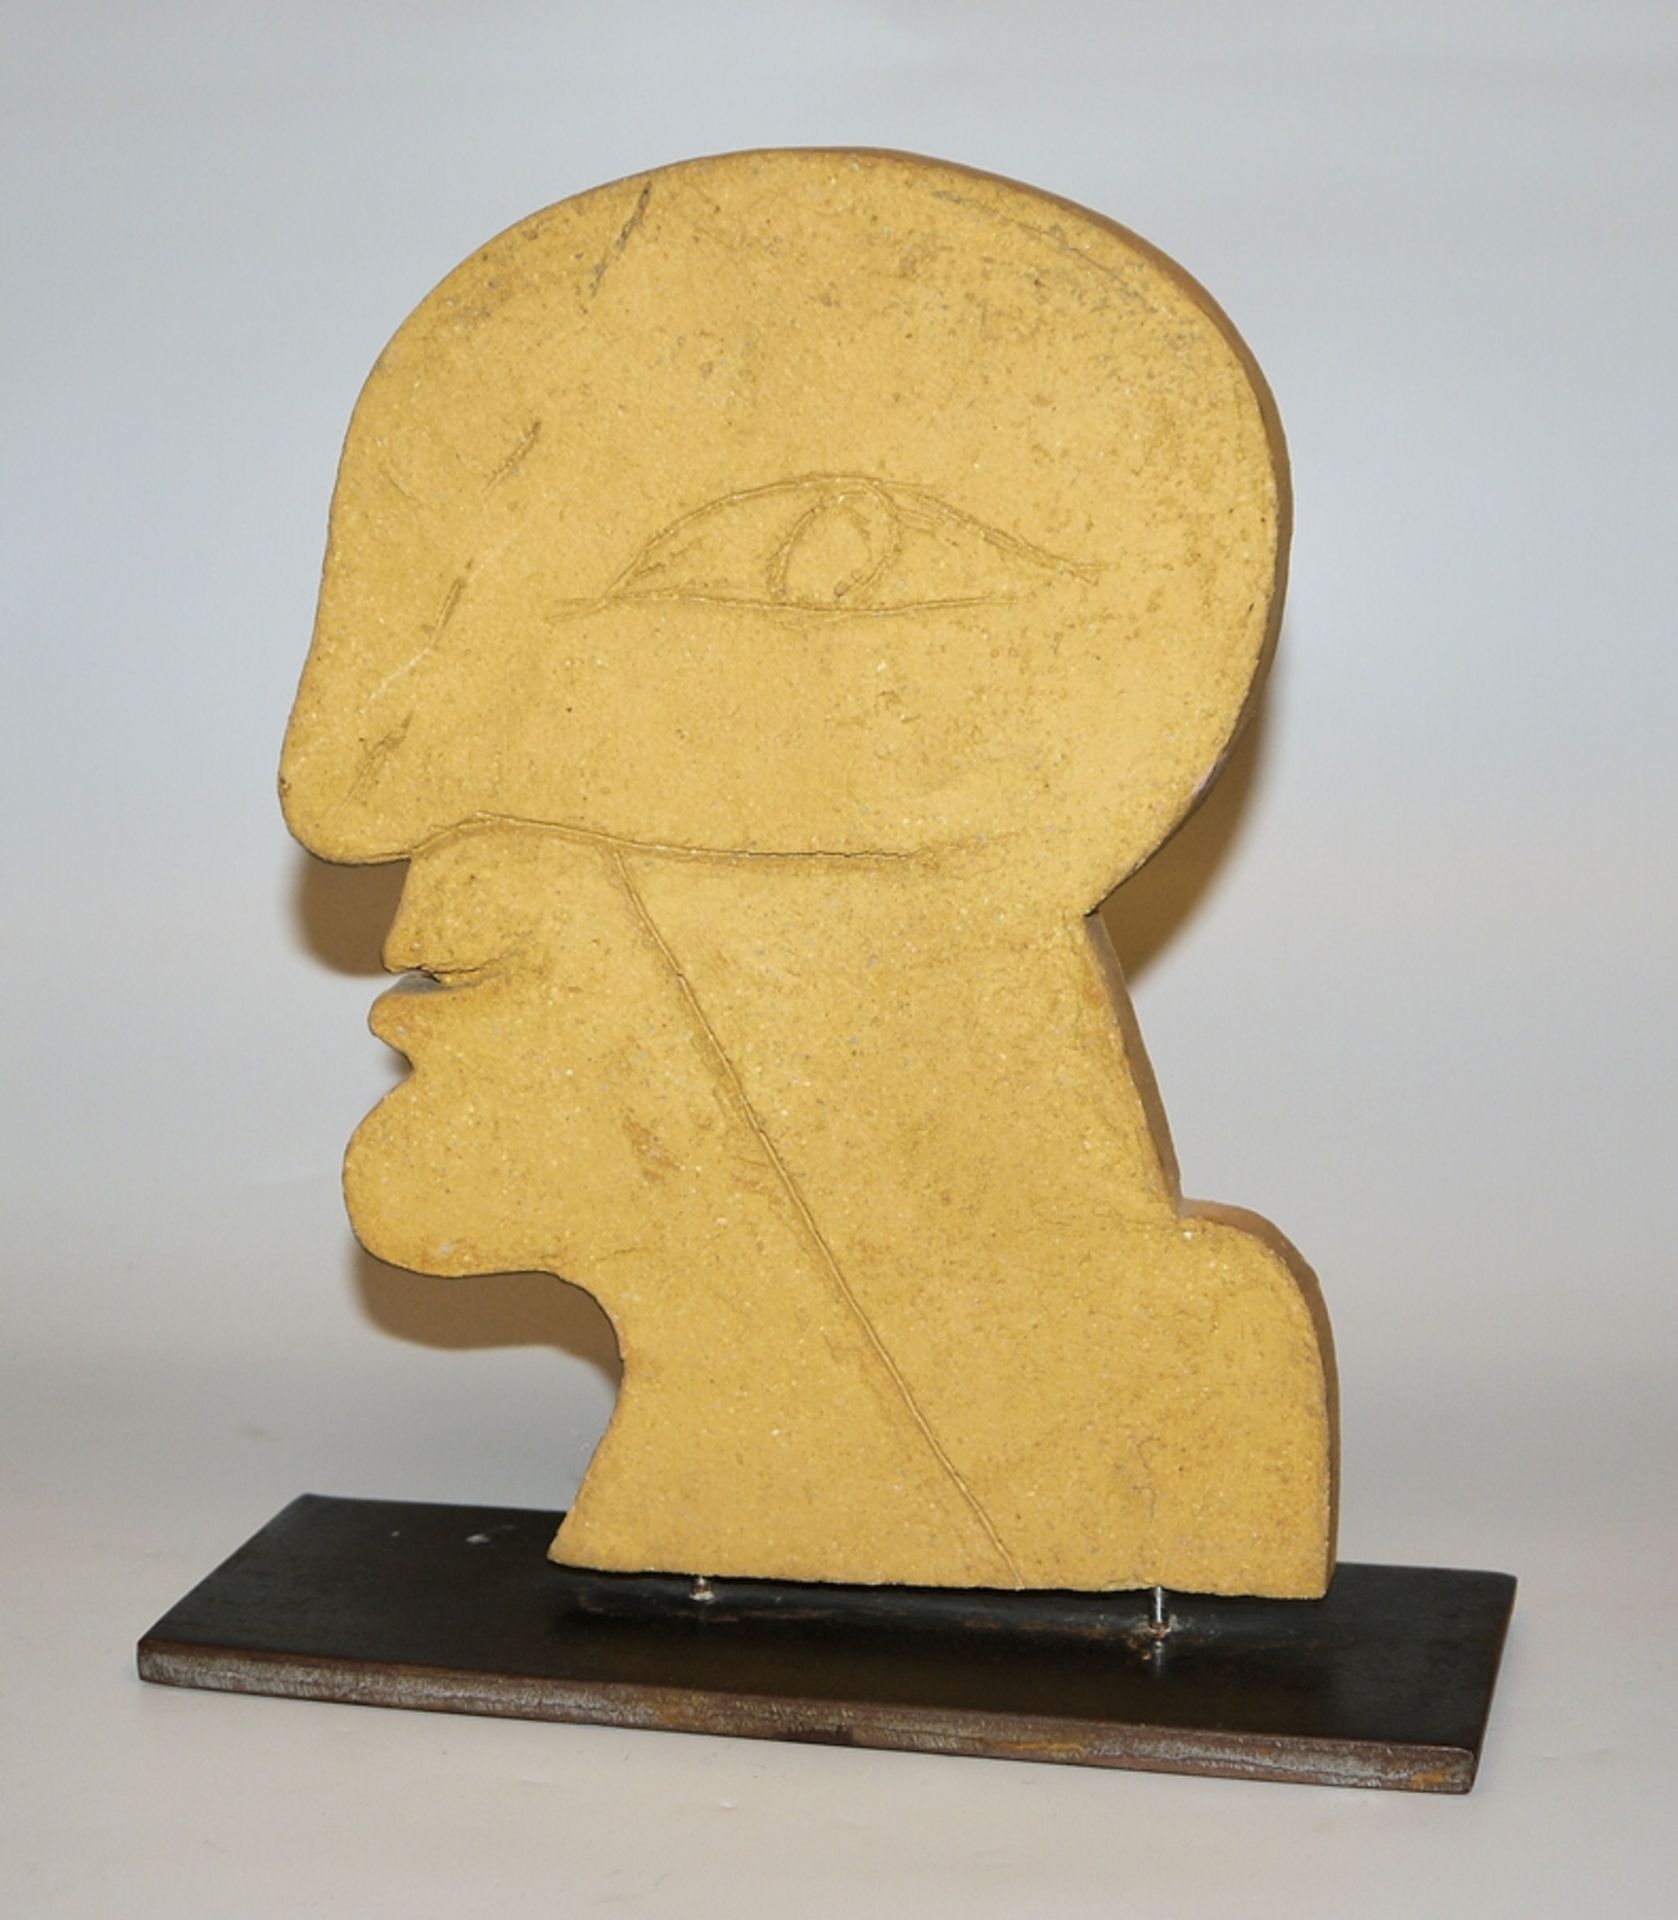 Horst Antes, "Small head with pustules", ochre-coloured body, unique piece from 1971 - Image 2 of 3